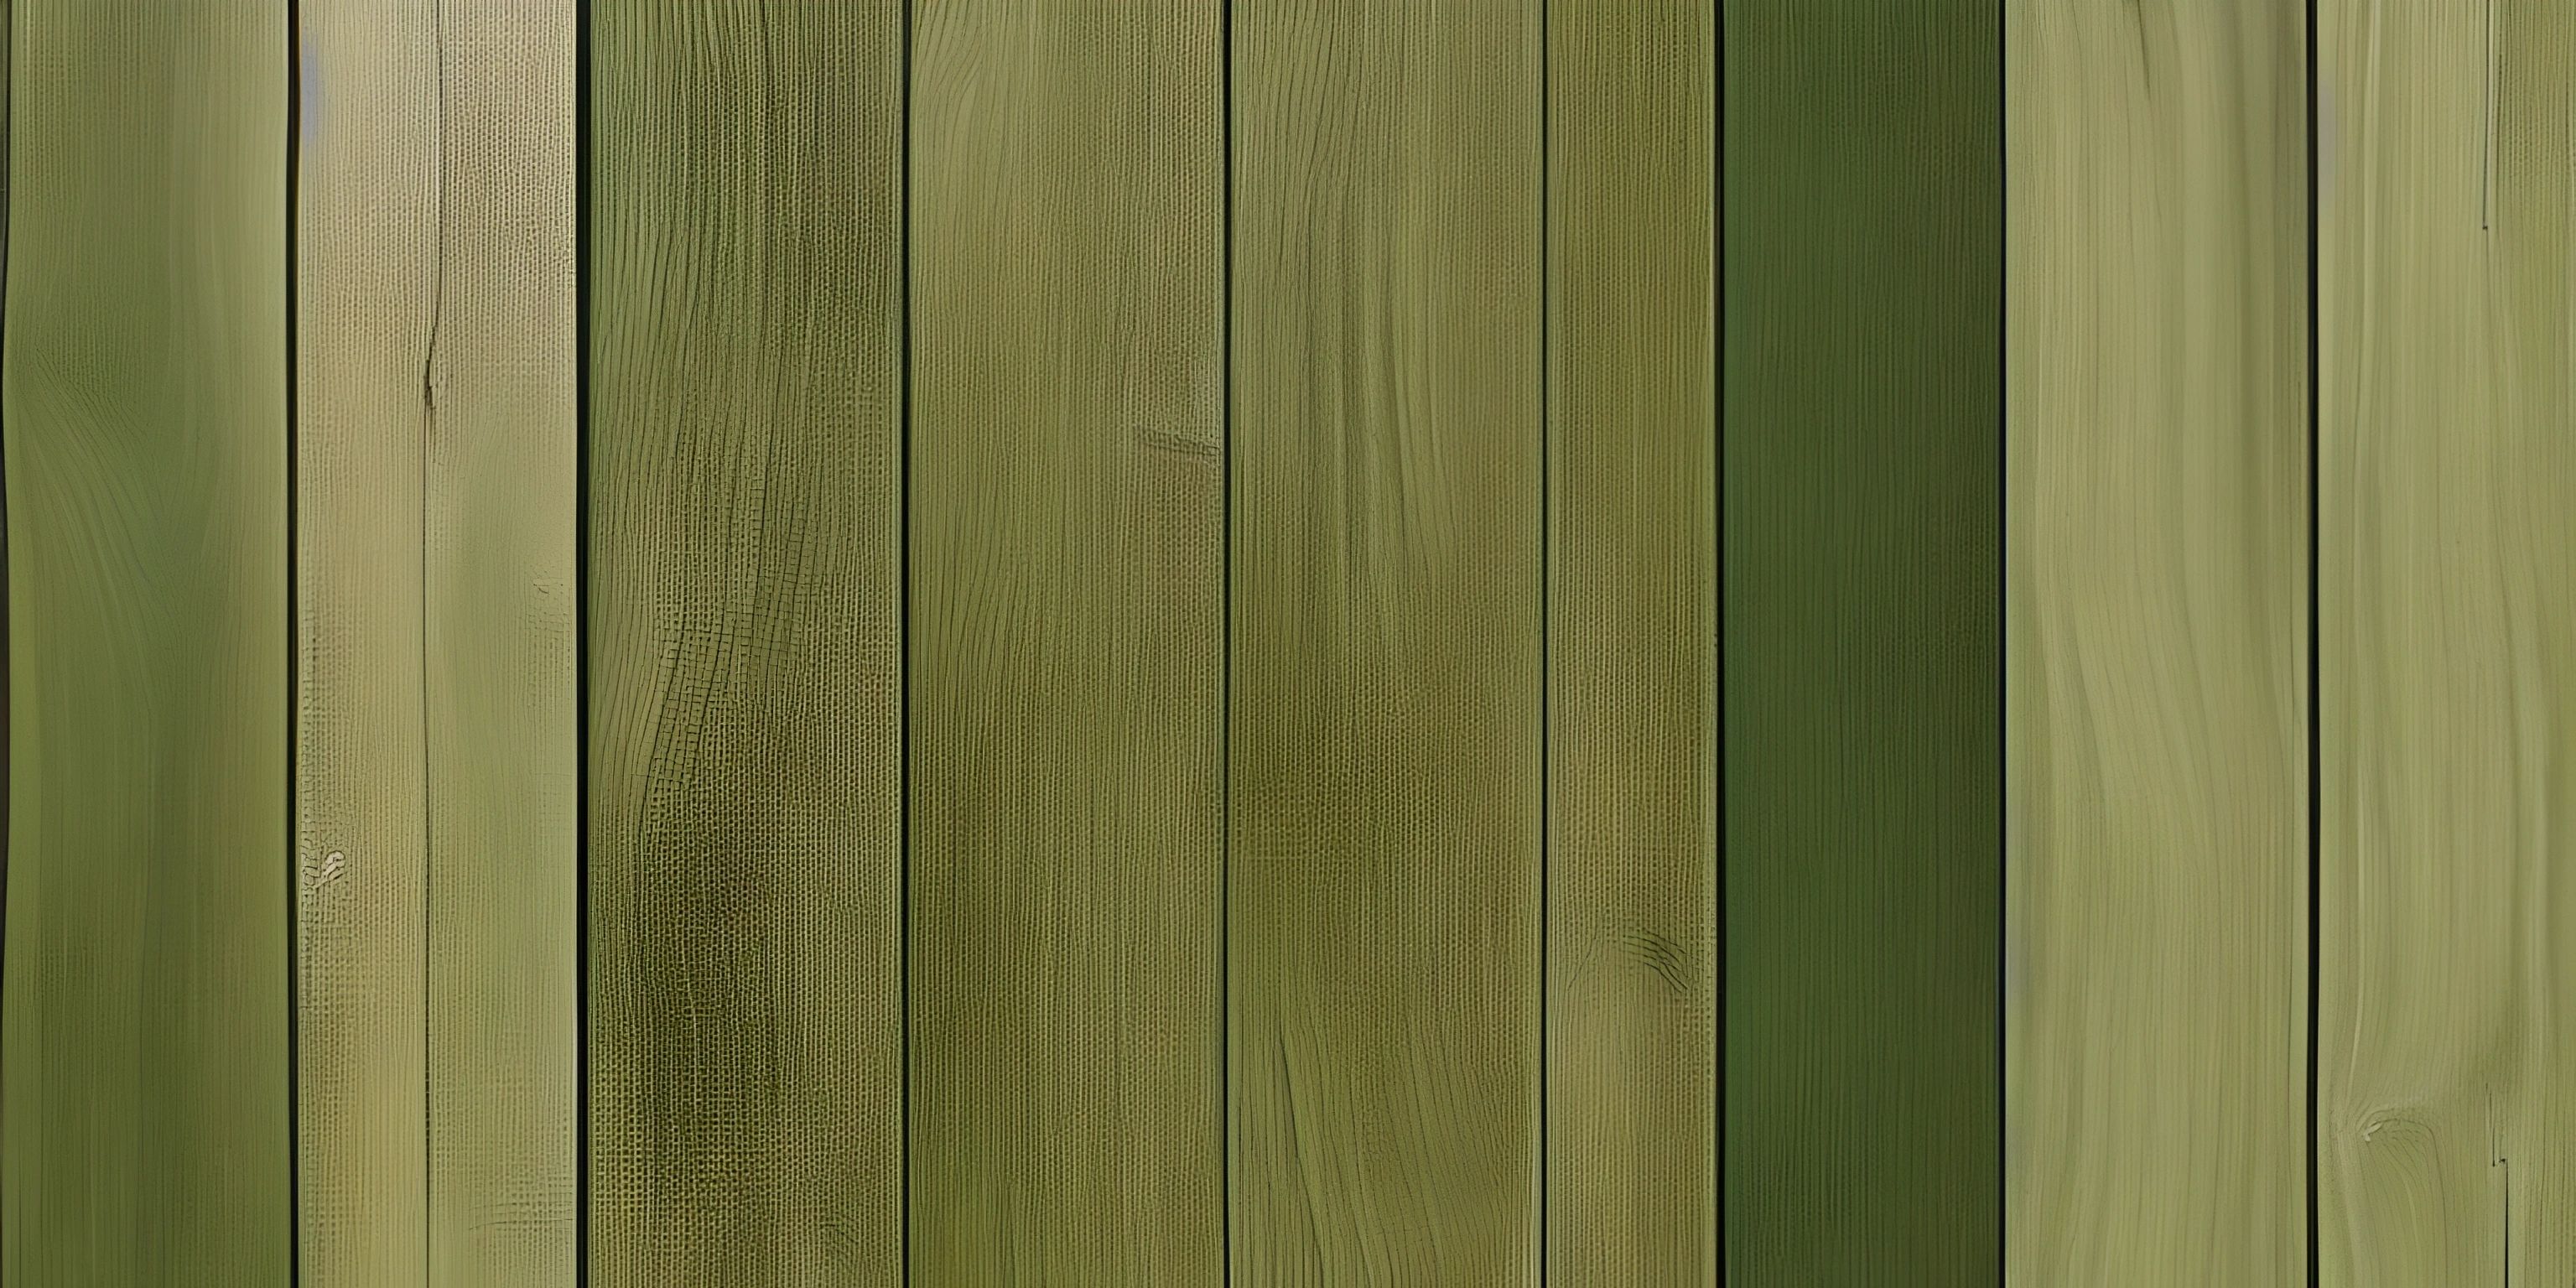 a green planked wall that is very colorfully painted in some colors of green